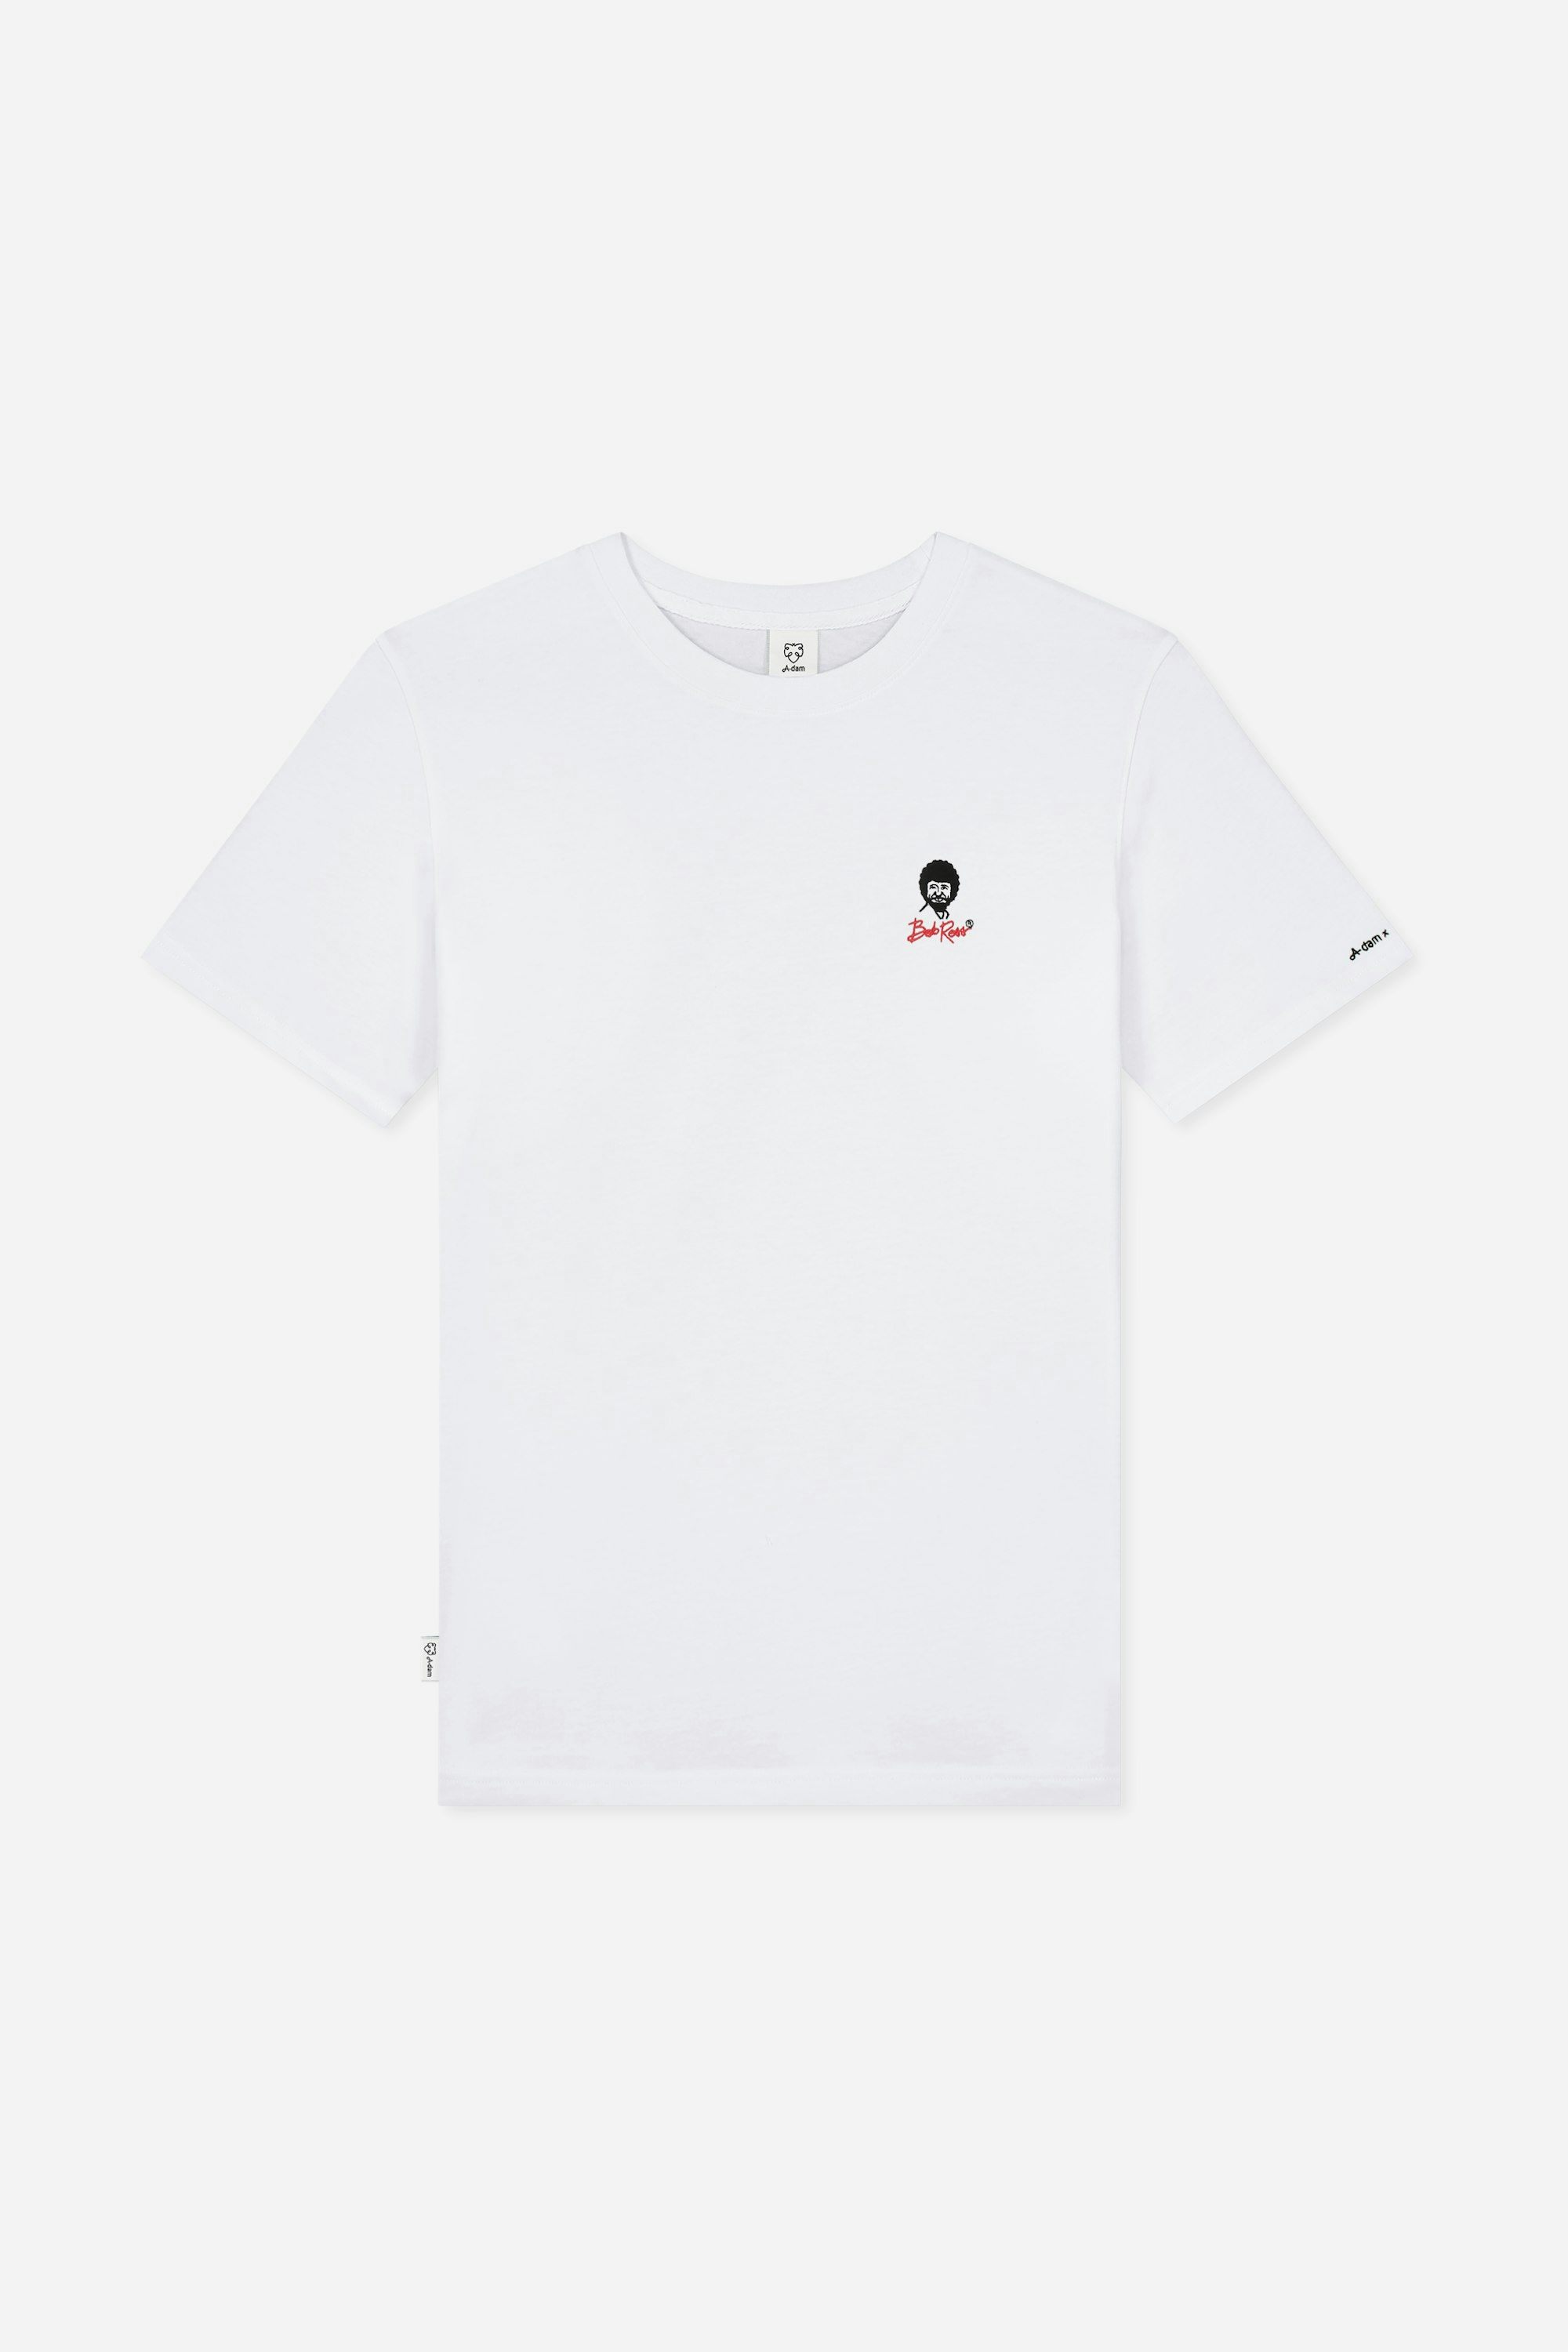 A-dam x Bob Ross organic white T-shirt with classic embroidery | A-dam